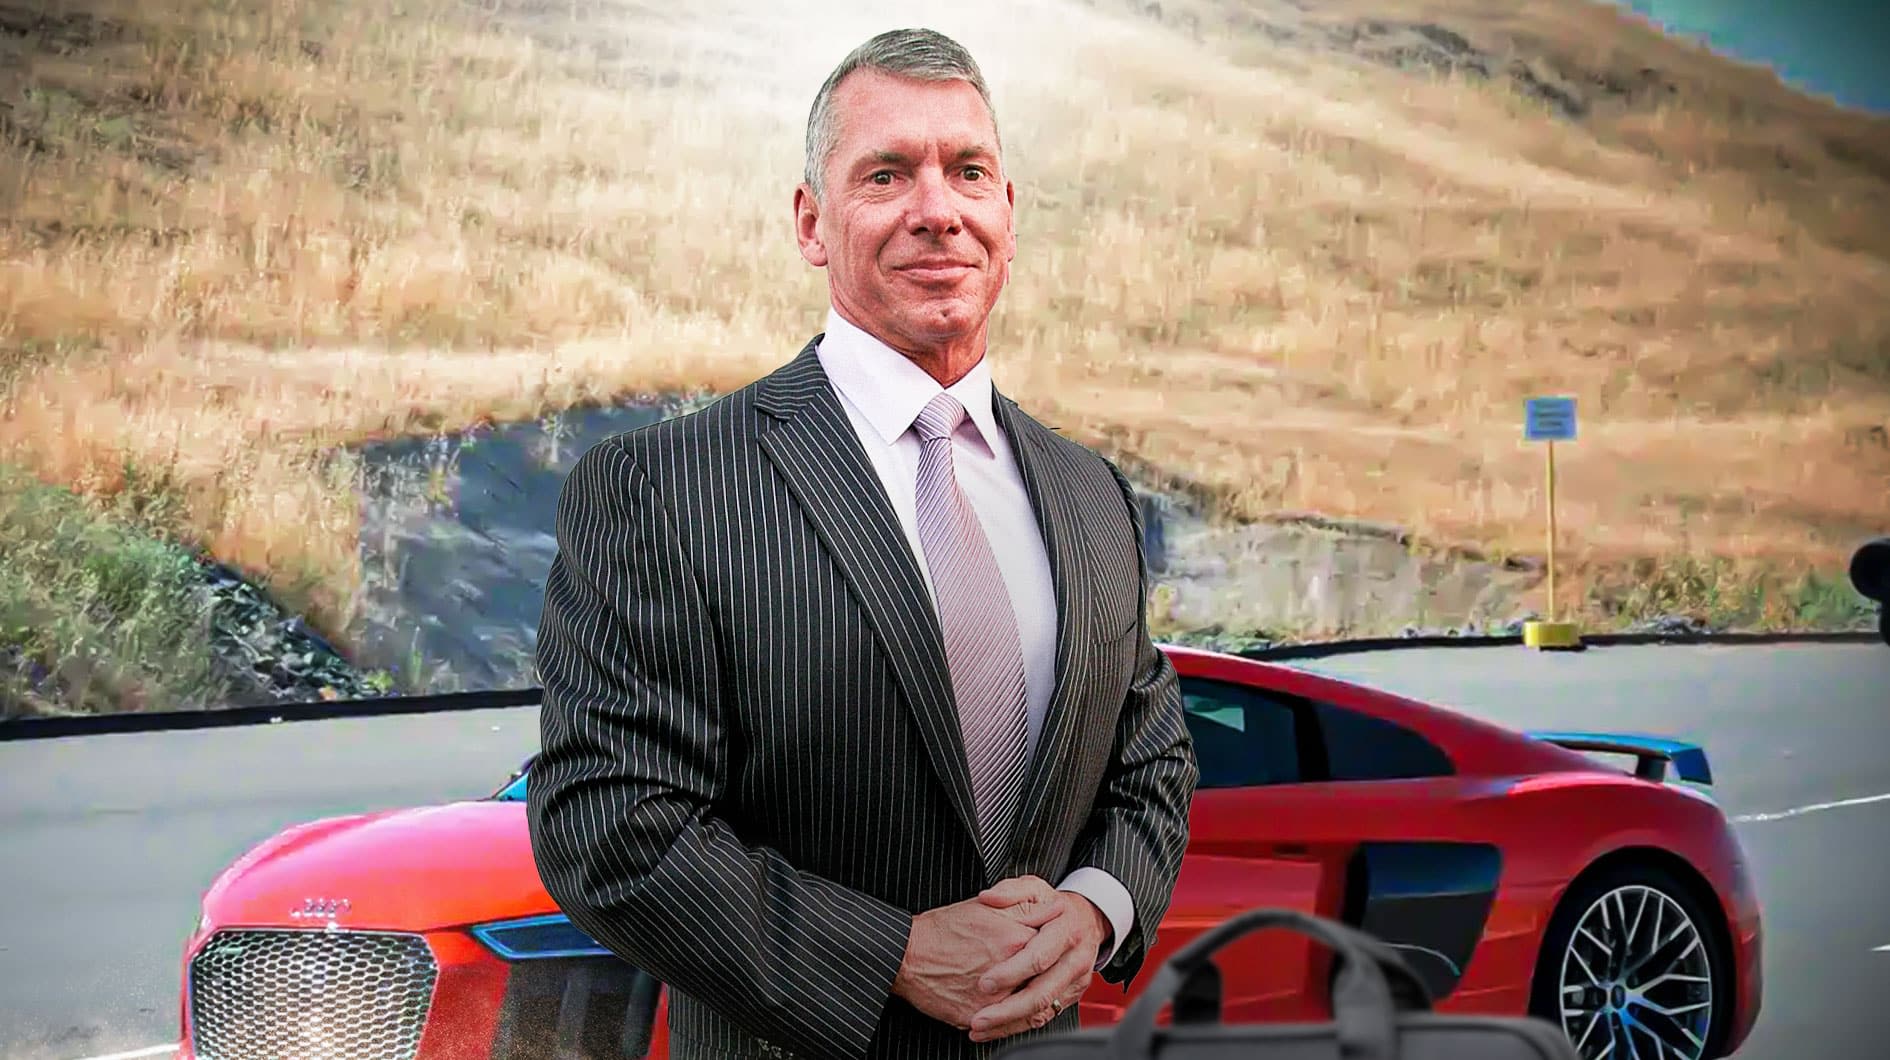 Check out Vince McMahon's incredible $1.7 million car collection, with photos